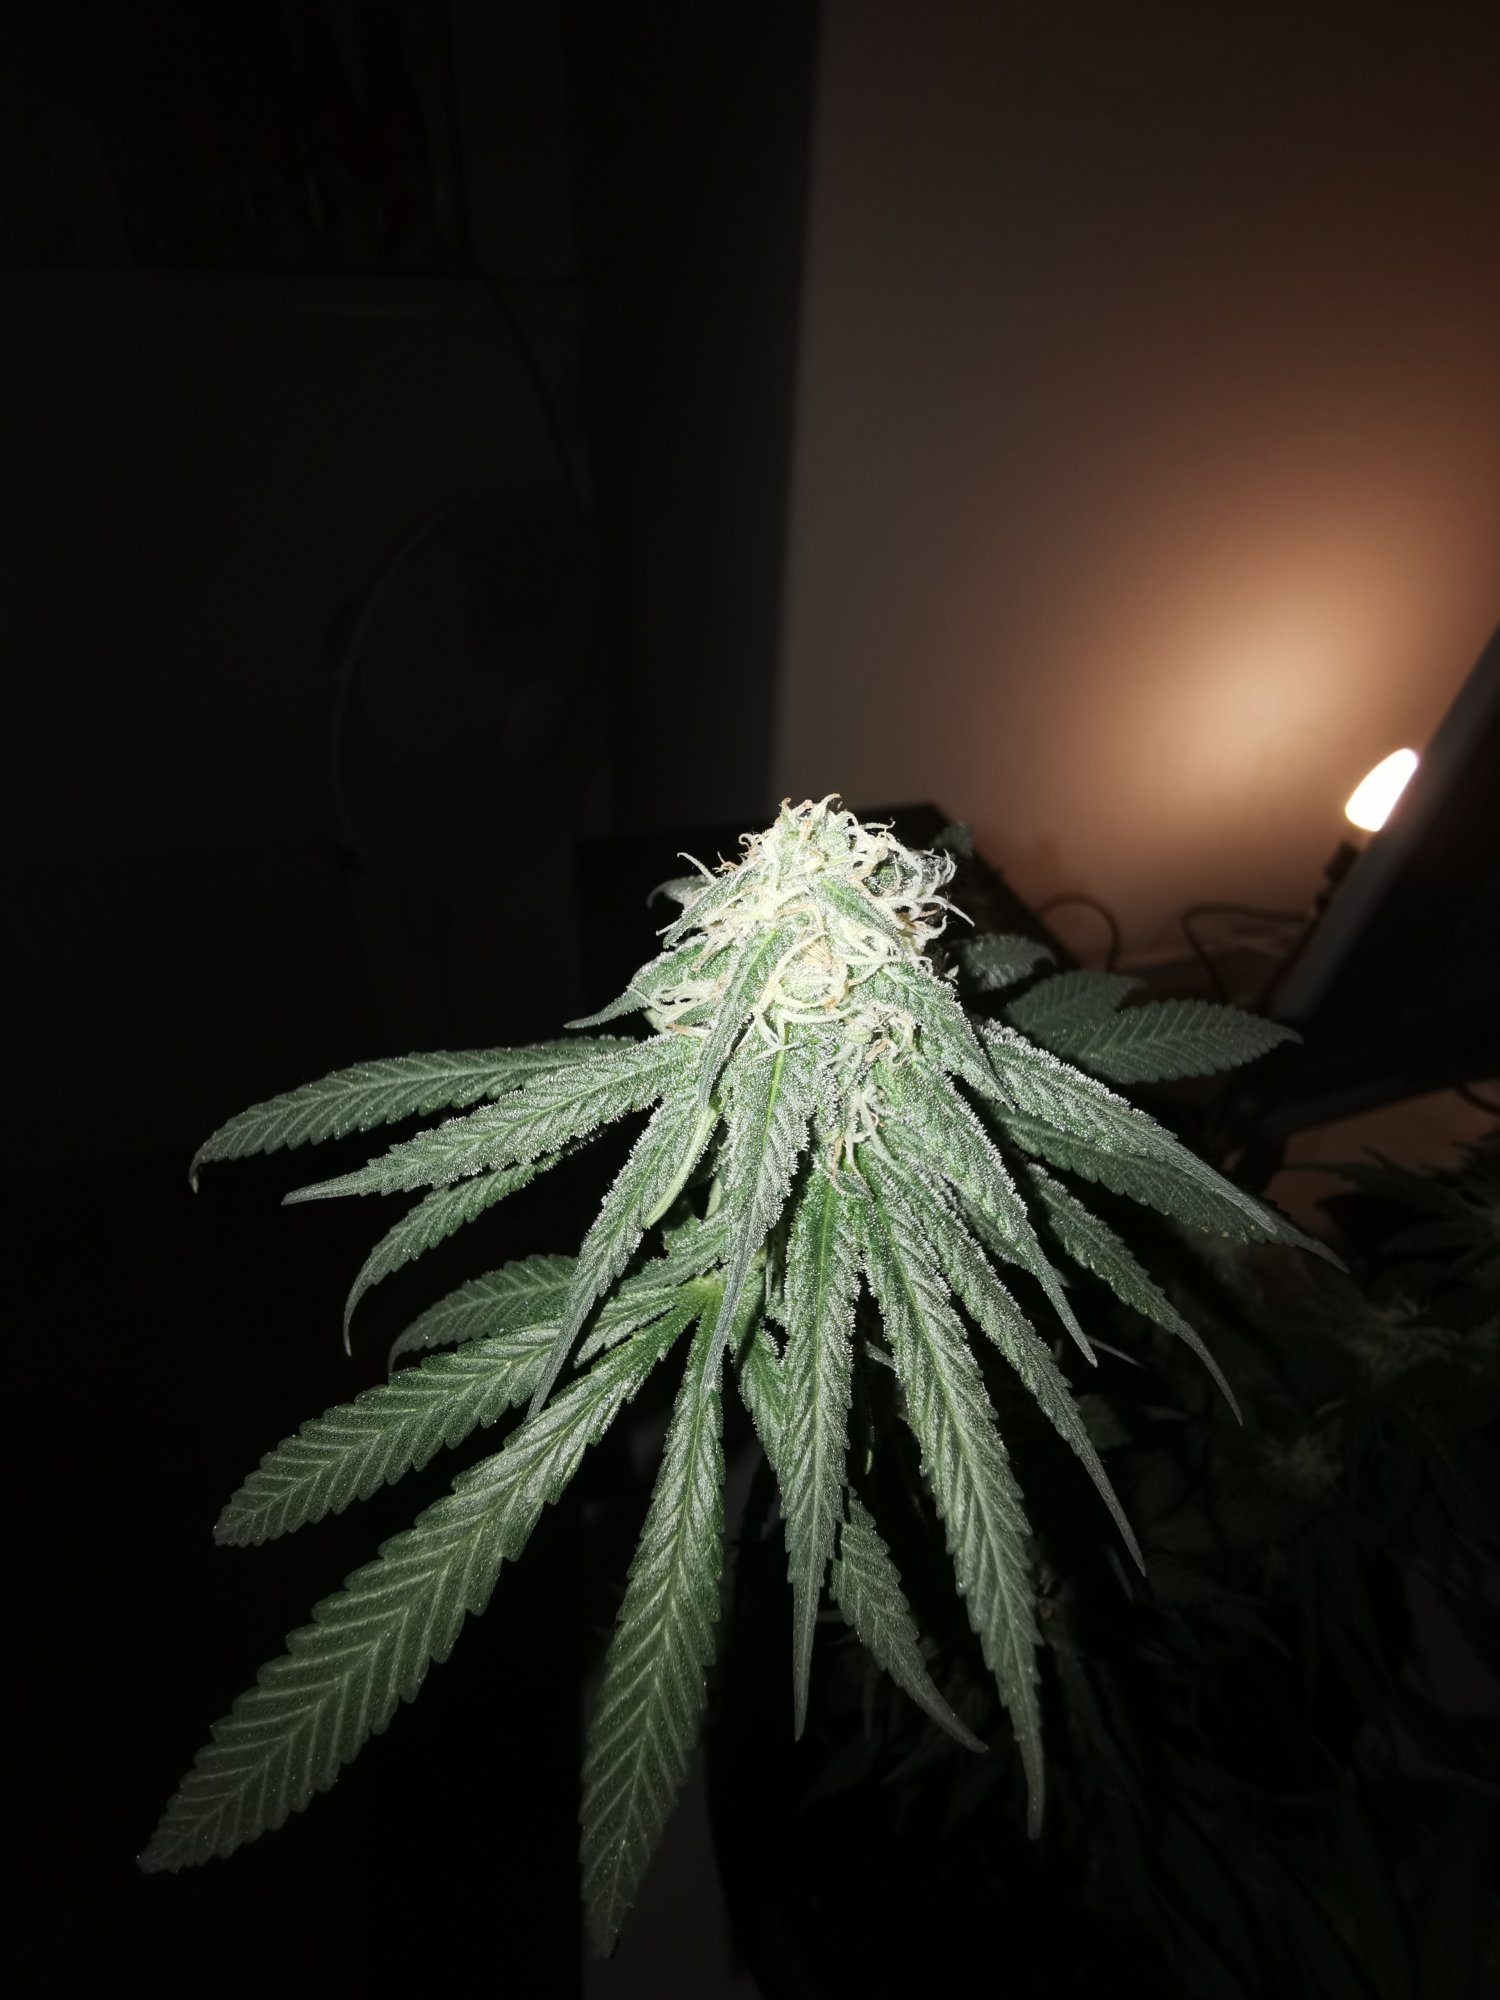 How is my plant and can you give estimated time of harvest 2